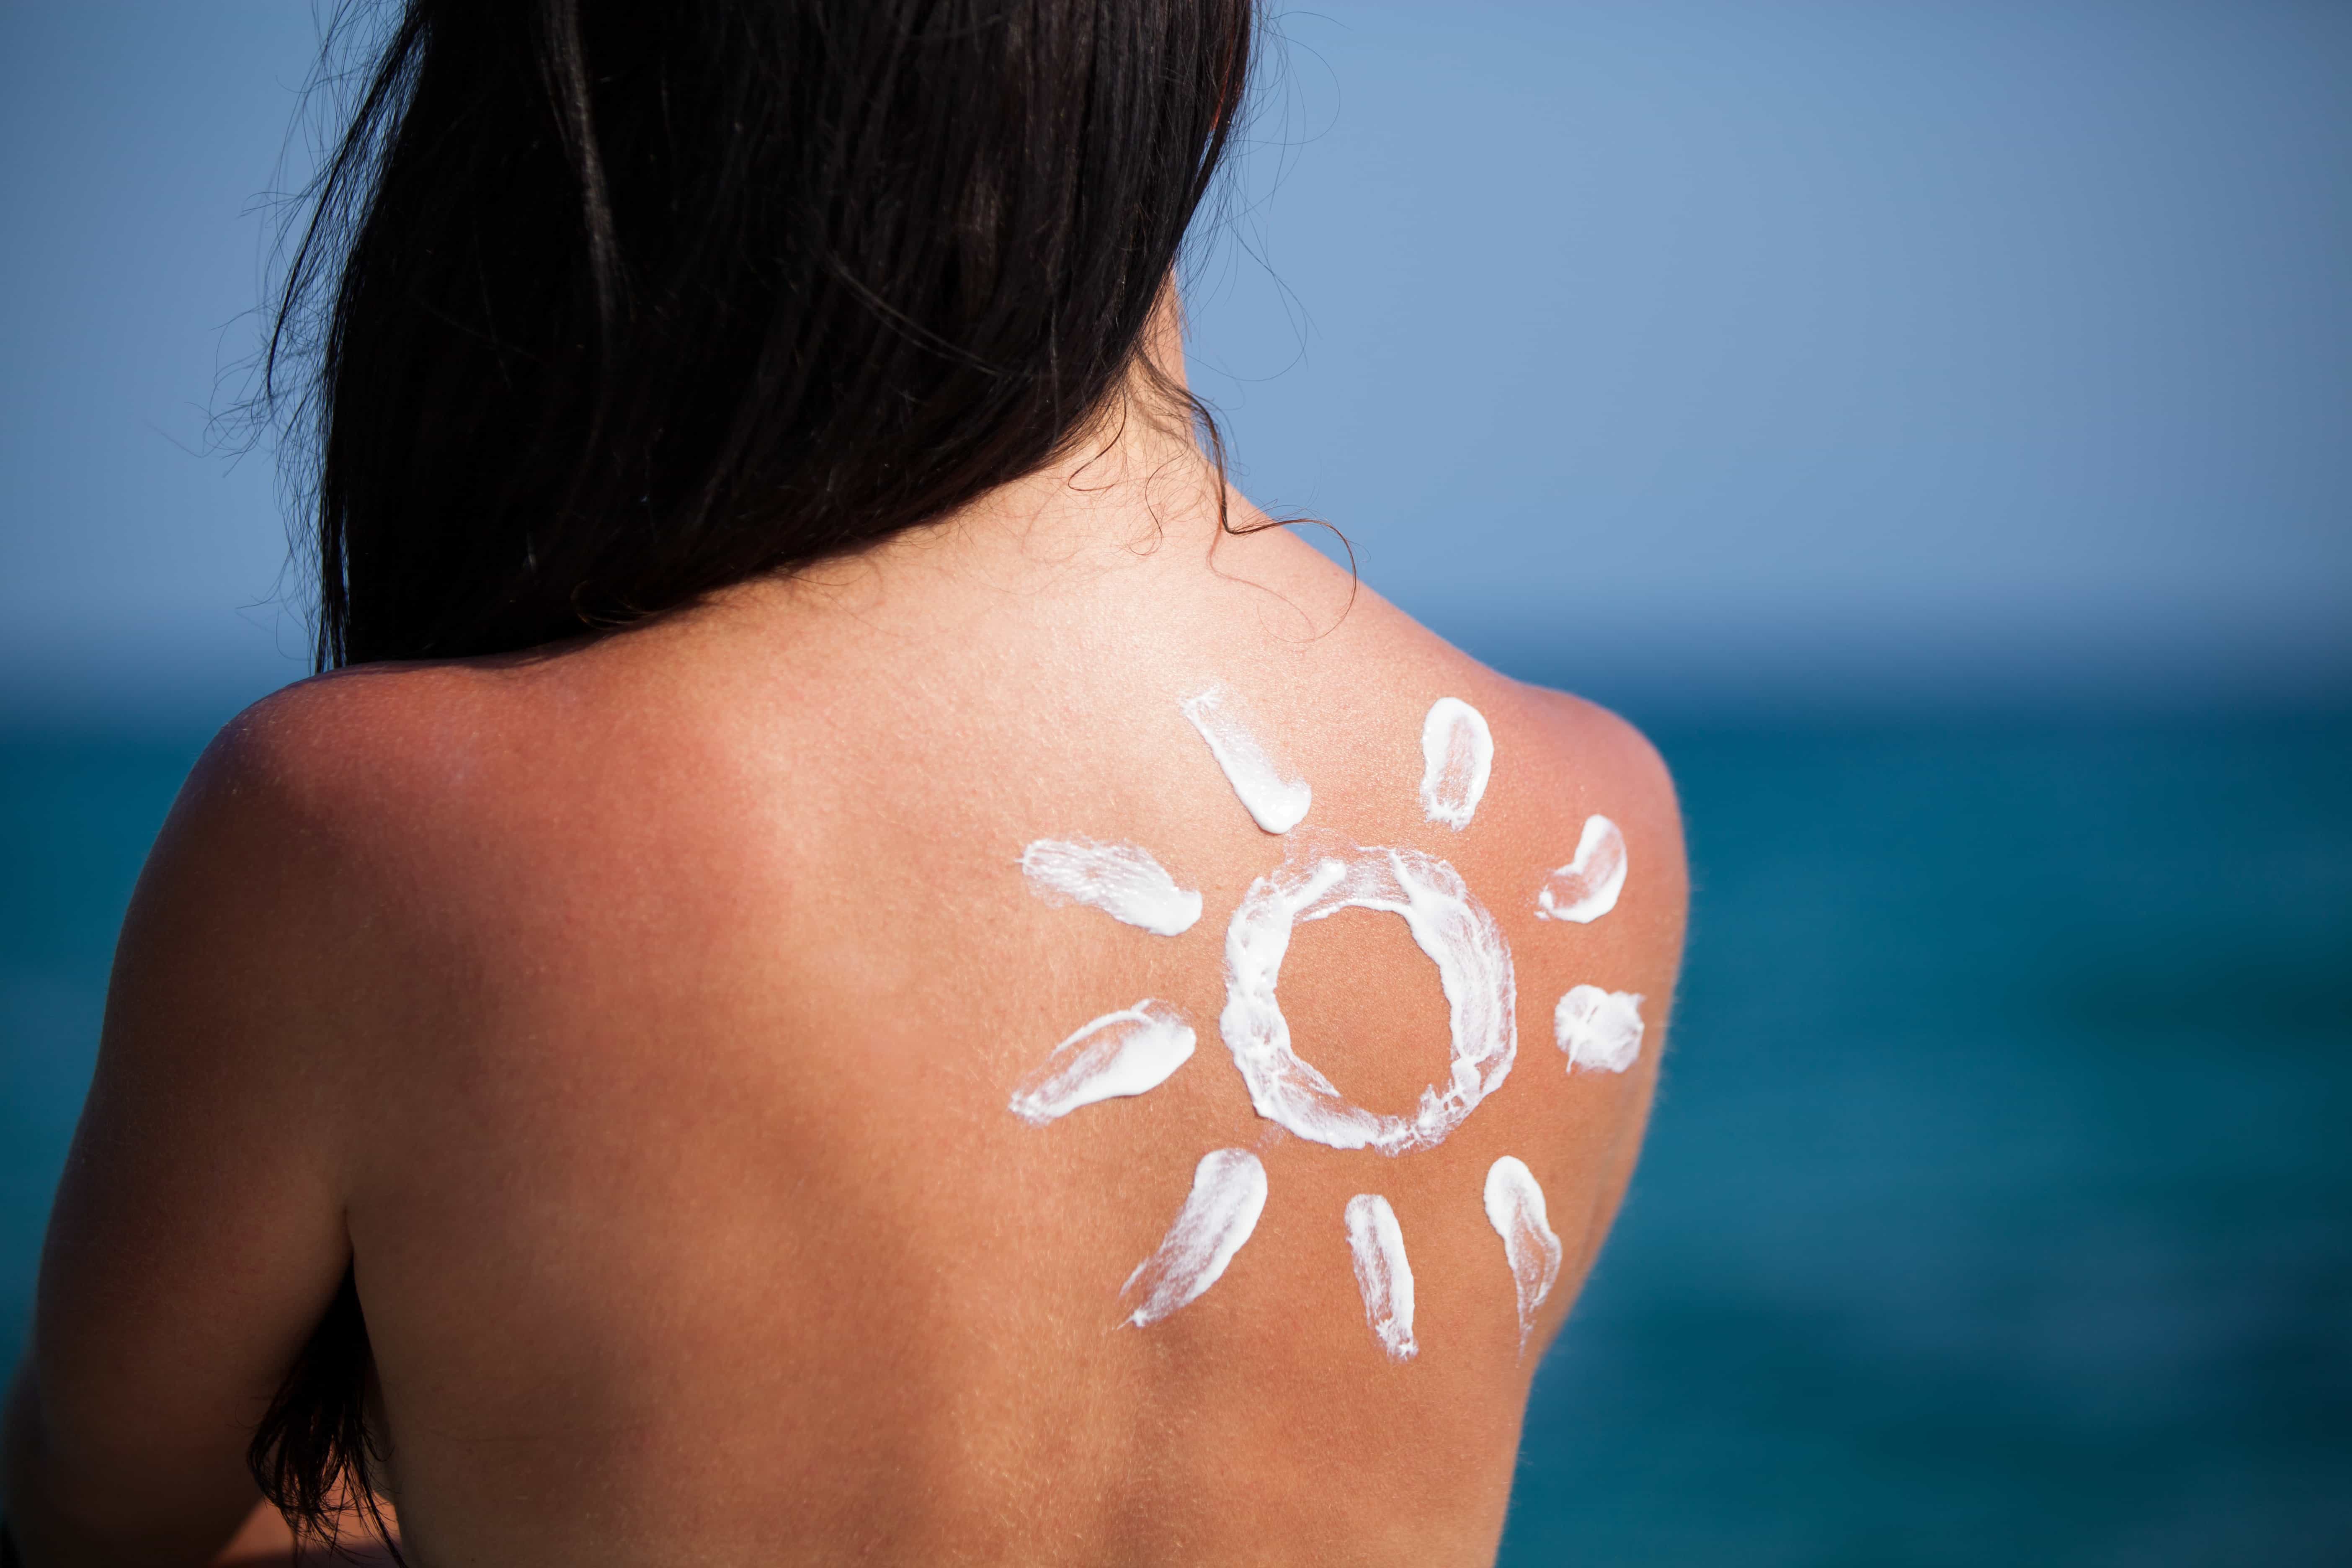 How to Prevent Skin Cancer?